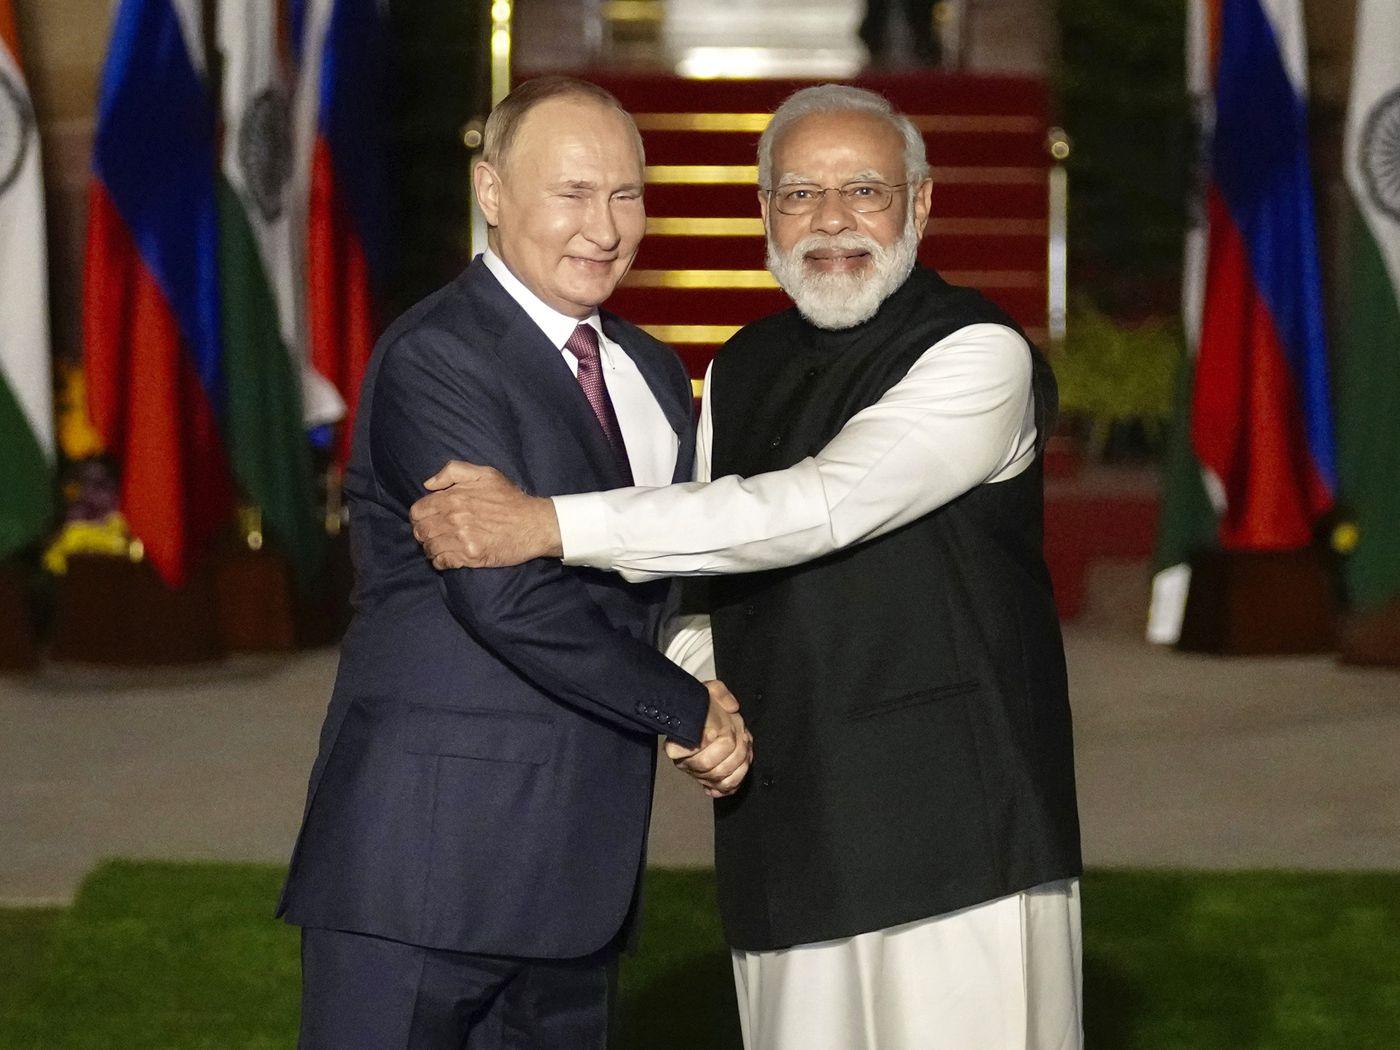 Strengthening Ties: India and Russia Explore New Trade Route Amid Ukraine War Timesnews24.in